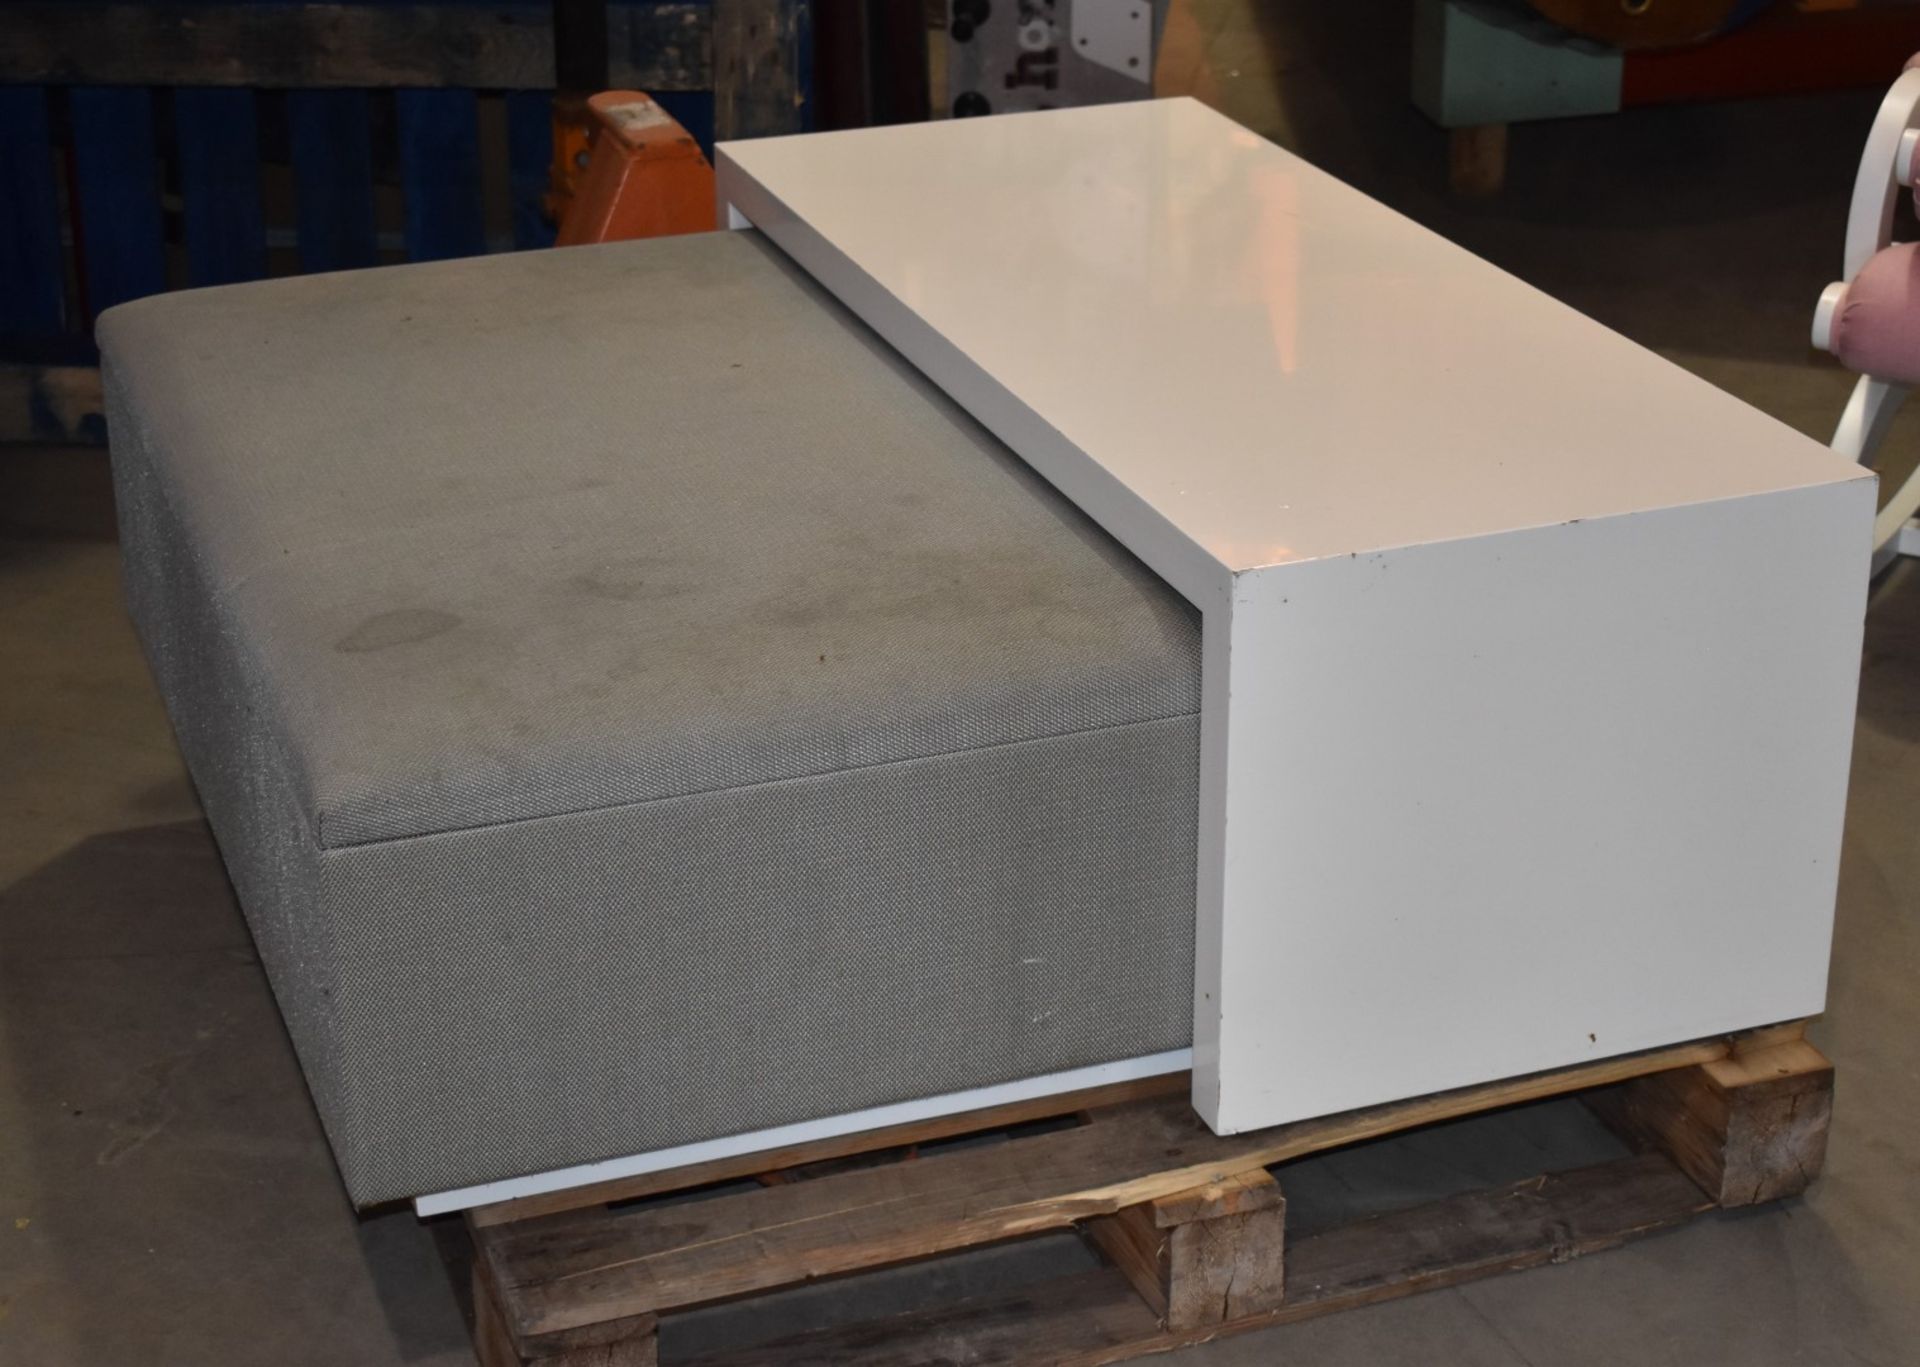 1 x Large Fabric Ottoman With White Gloss Overtable - Size H36 x W110 x D110 cms - CL572 - Ref - Image 2 of 8